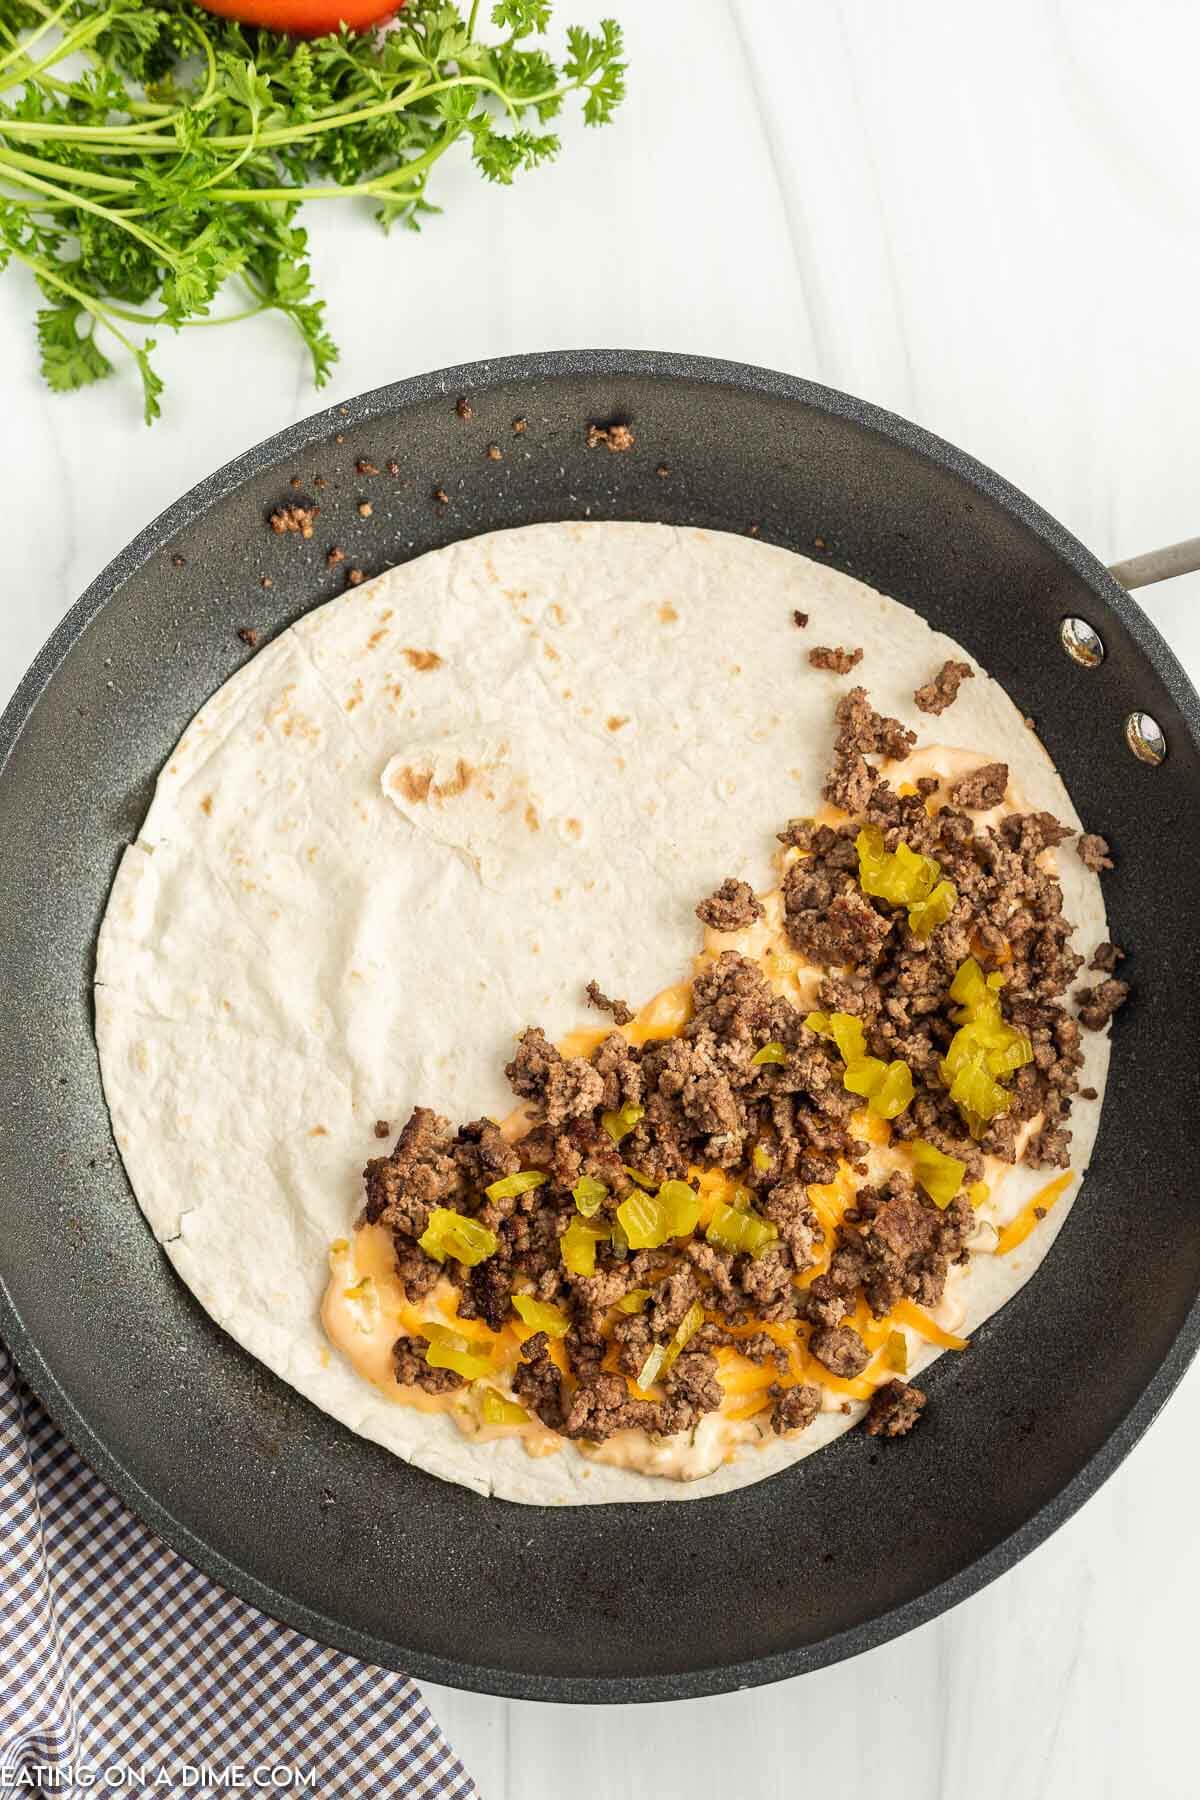 Topping the tortilla with sauce, cheese, and ground beef